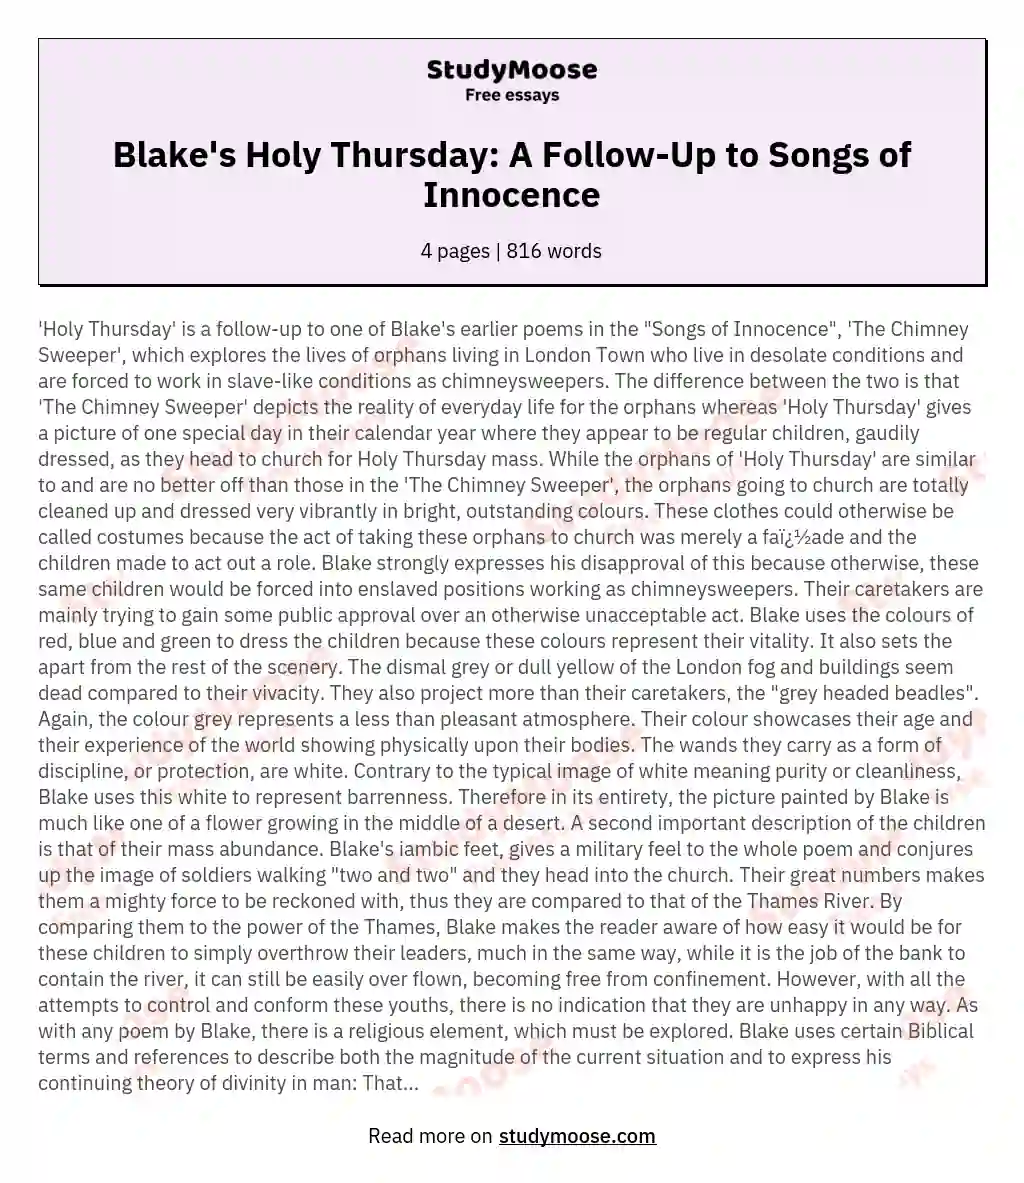 Blake's Holy Thursday: A Follow-Up to Songs of Innocence essay